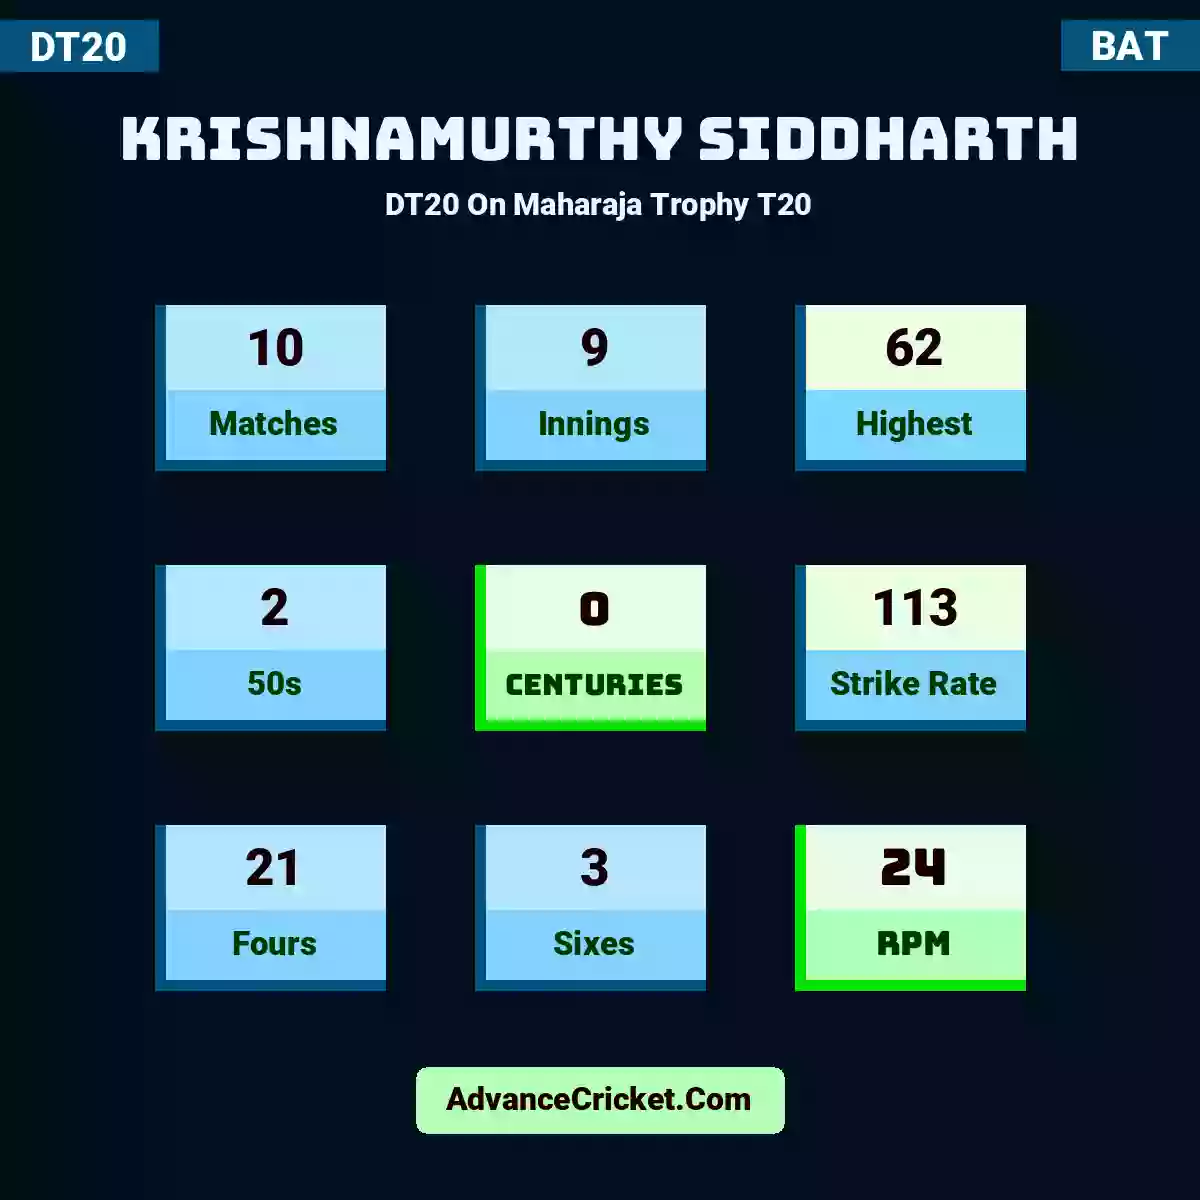 Krishnamurthy Siddharth DT20  On Maharaja Trophy T20, Krishnamurthy Siddharth played 10 matches, scored 62 runs as highest, 2 half-centuries, and 0 centuries, with a strike rate of 113. K.Siddharth hit 21 fours and 3 sixes, with an RPM of 24.